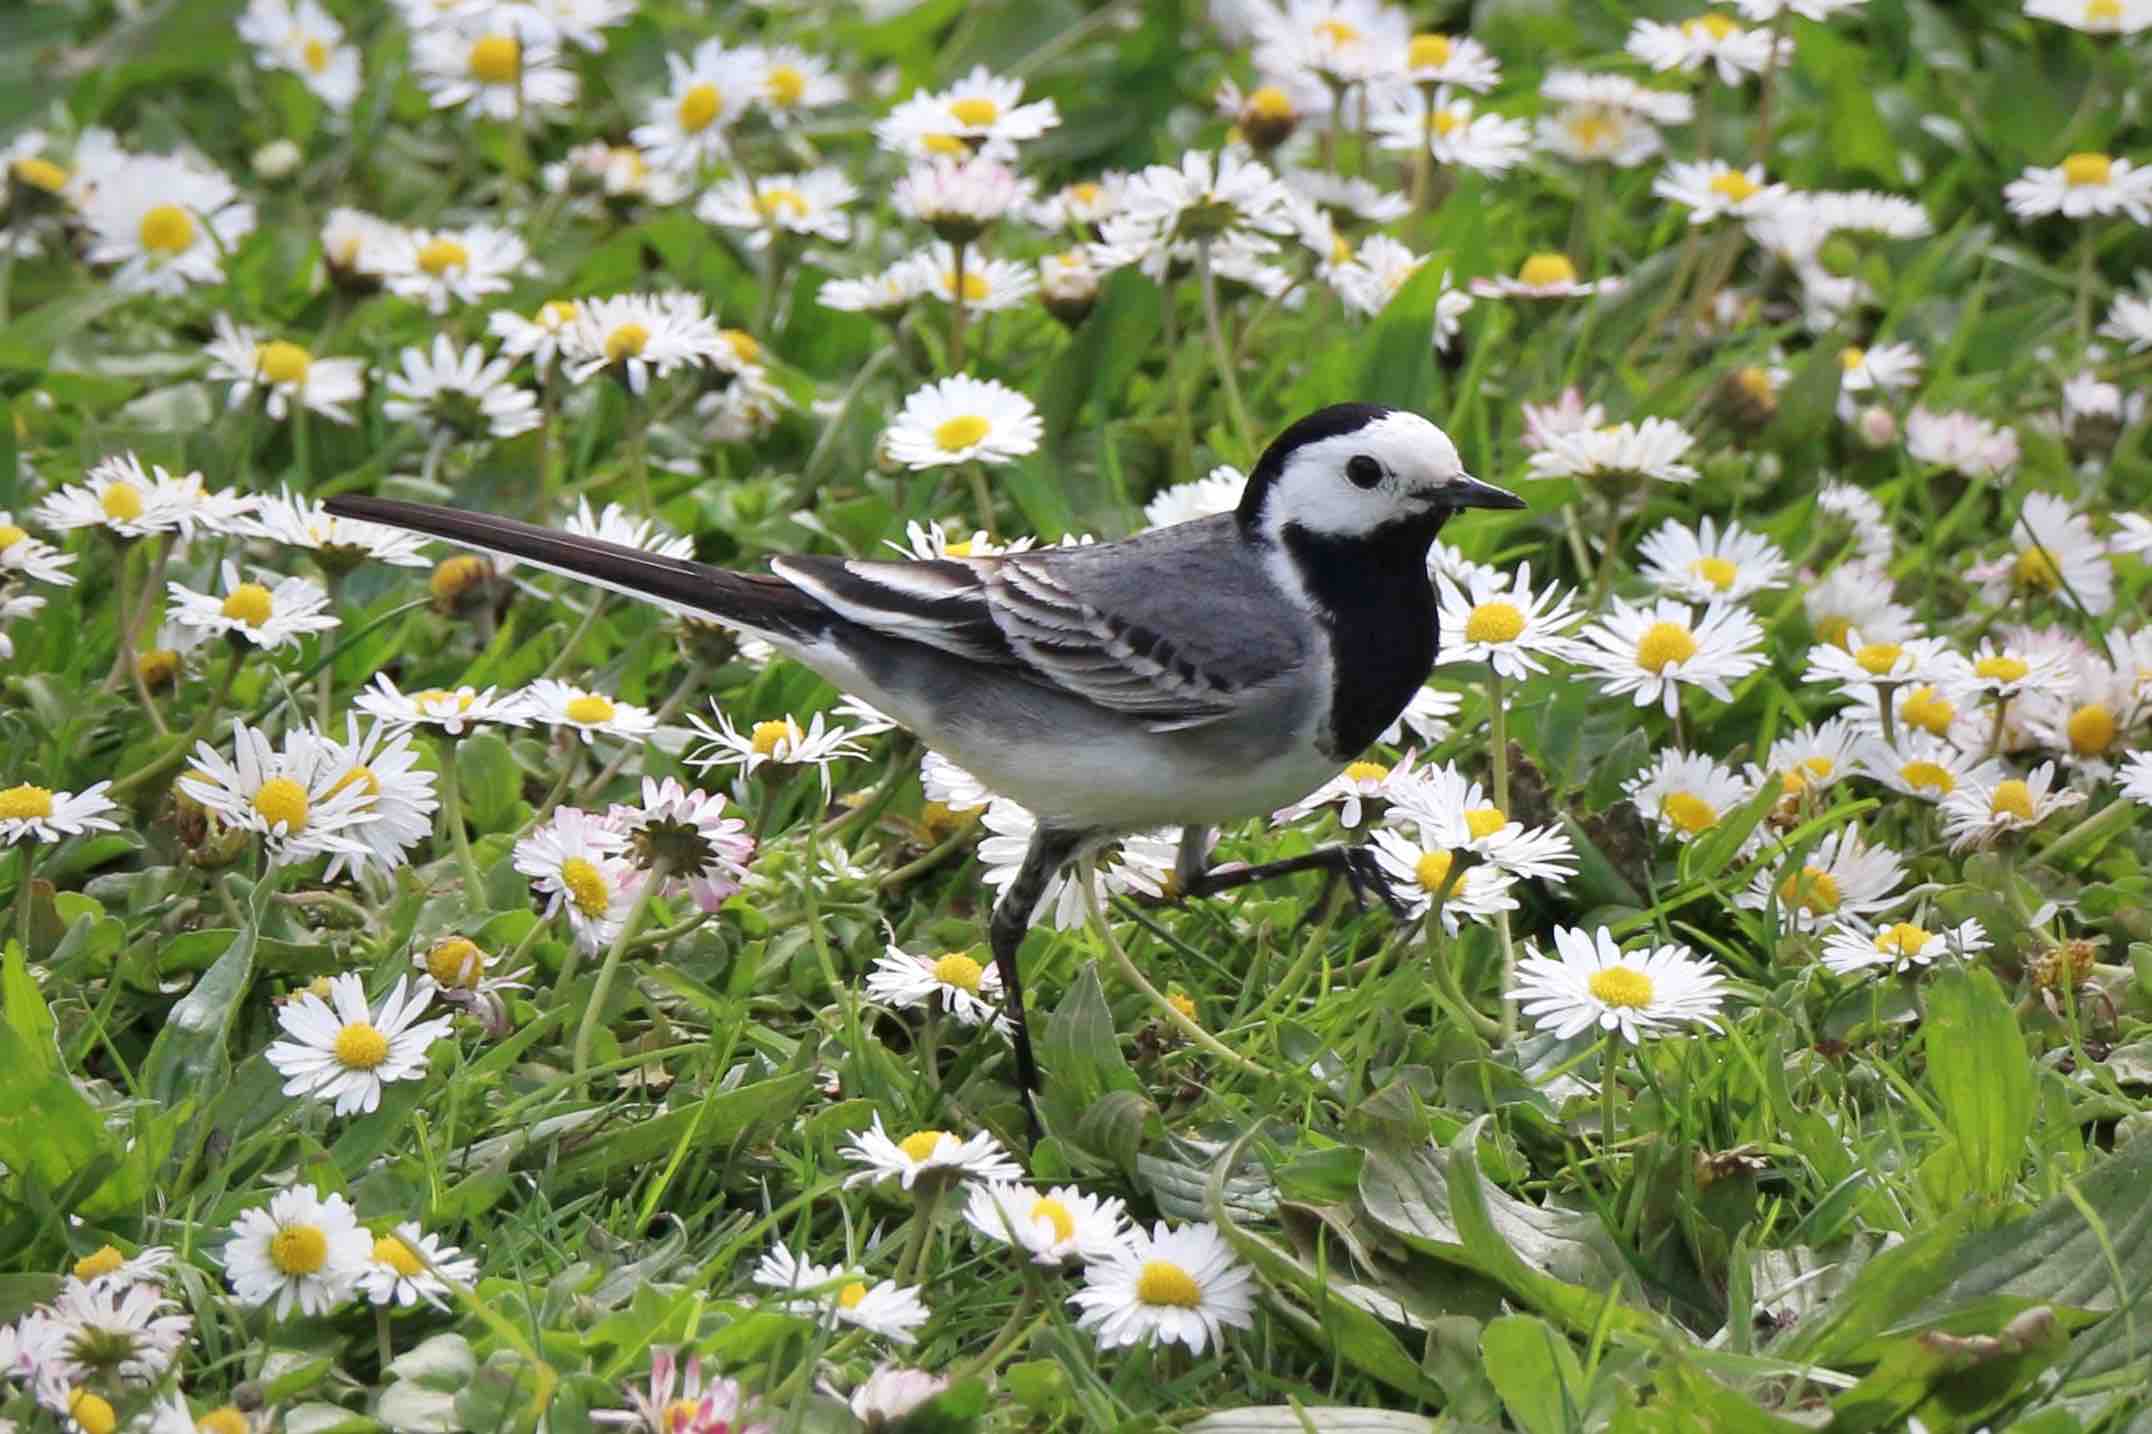 A white wagtail that looks like it's skipping through a field of daisies. It is mostly white and grey, with a black cap and a black bib that makes it look quite distinguished.
